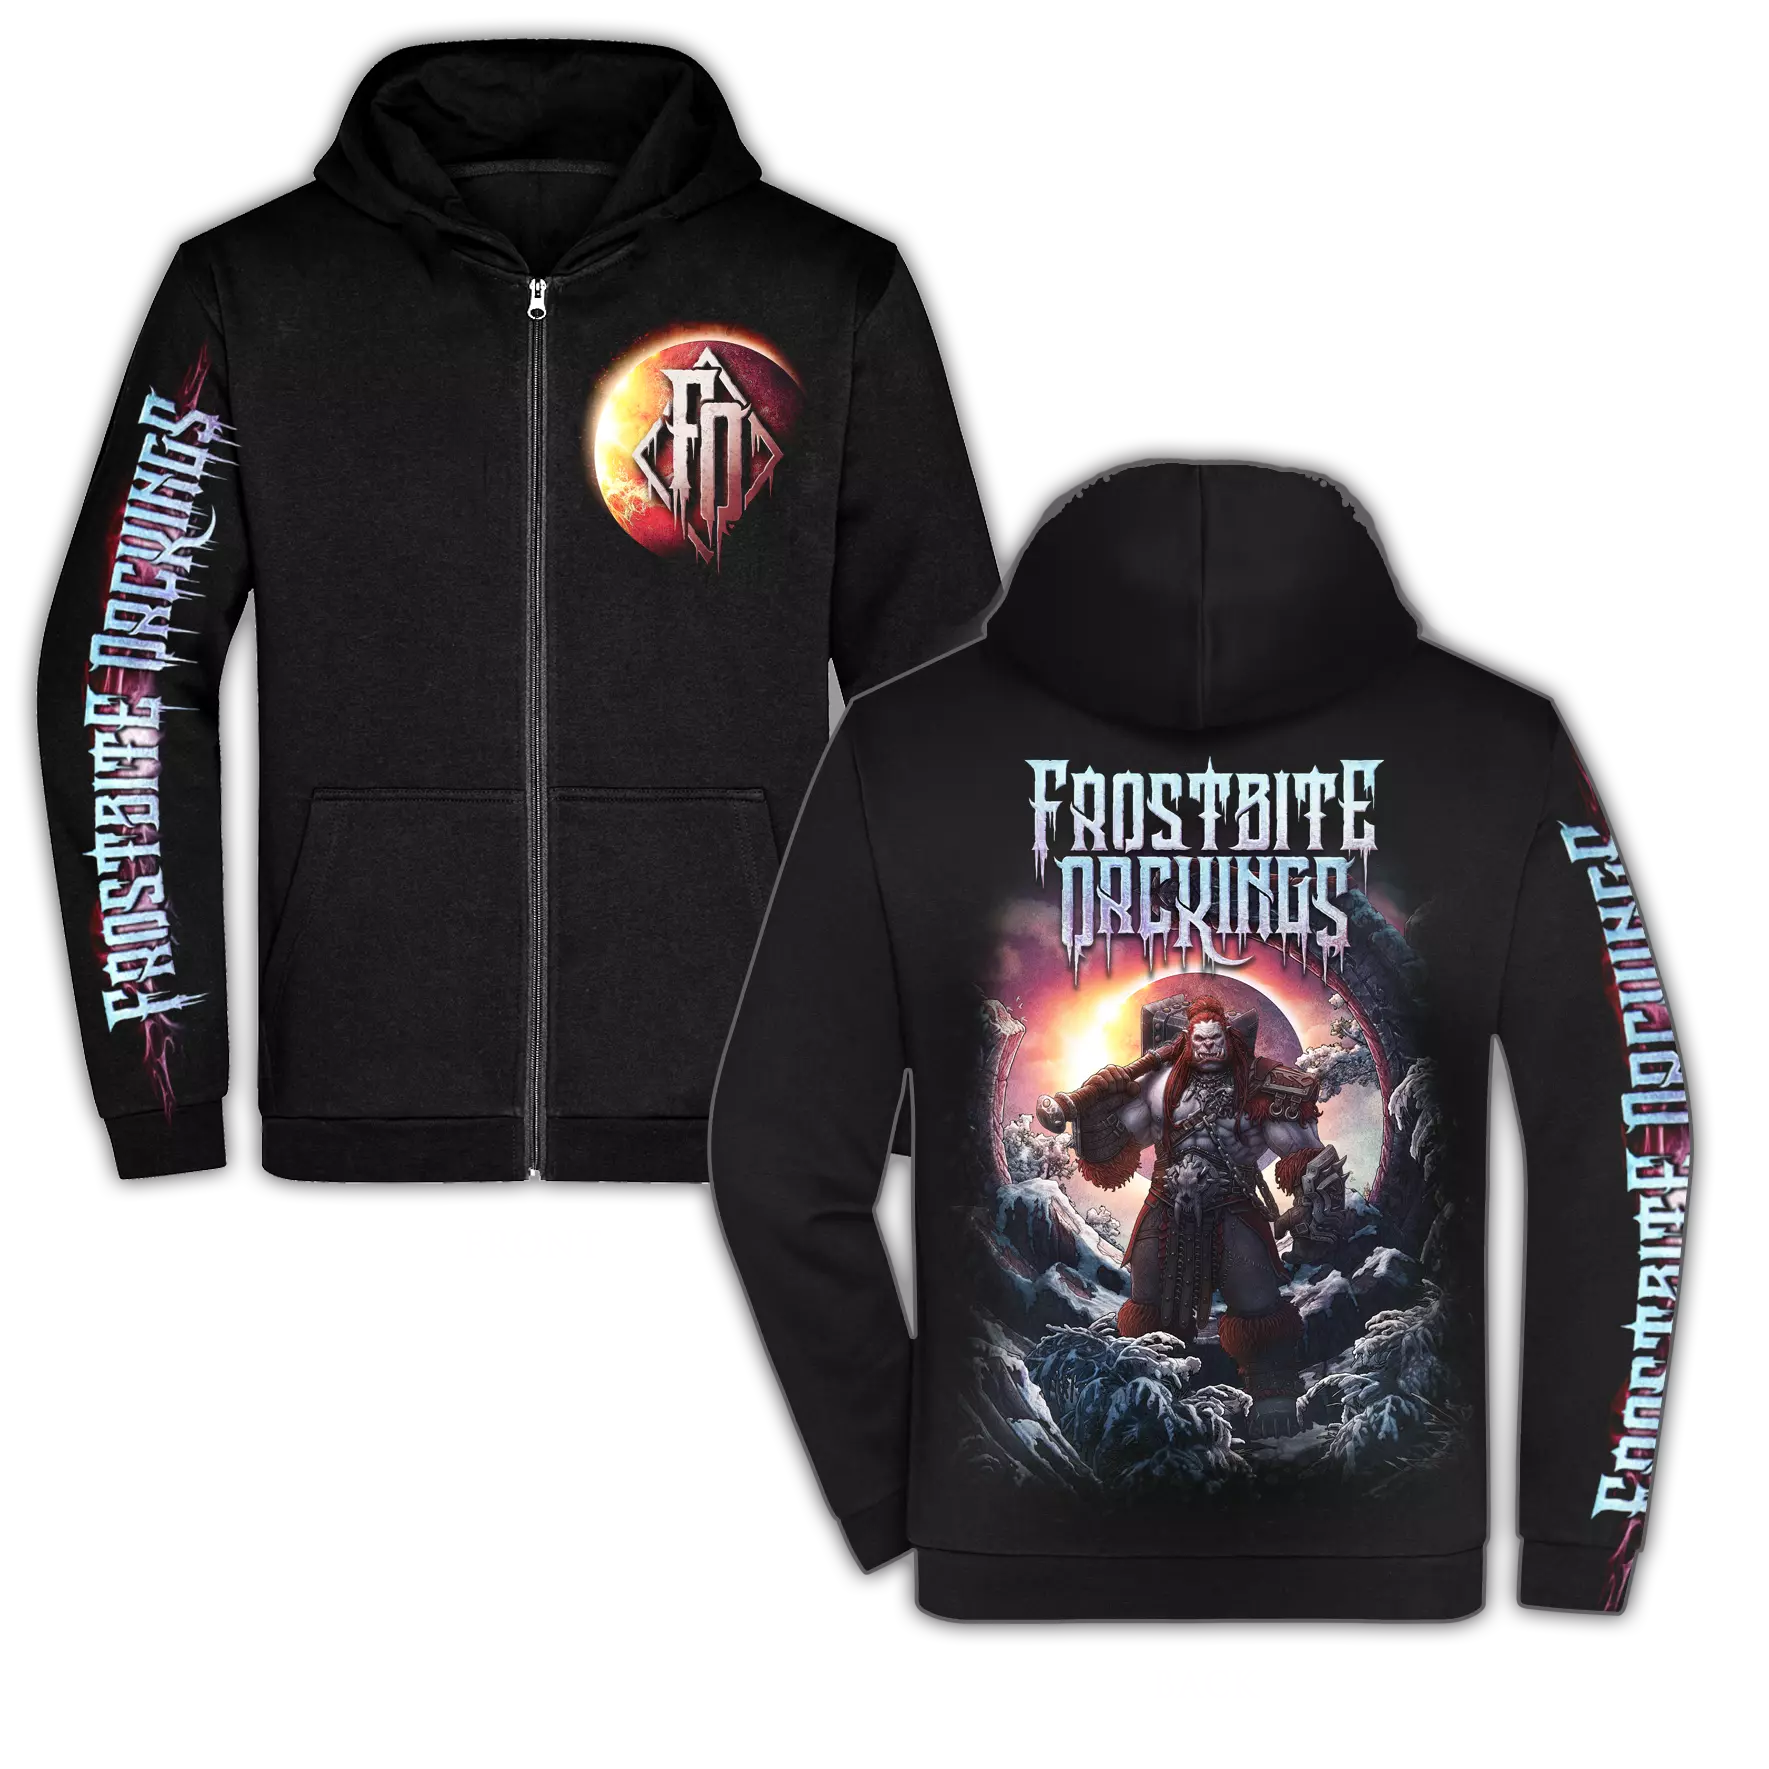 FROSTBITE ORCKINGS - The Orcish Eclipse [ZIP HOODIE]